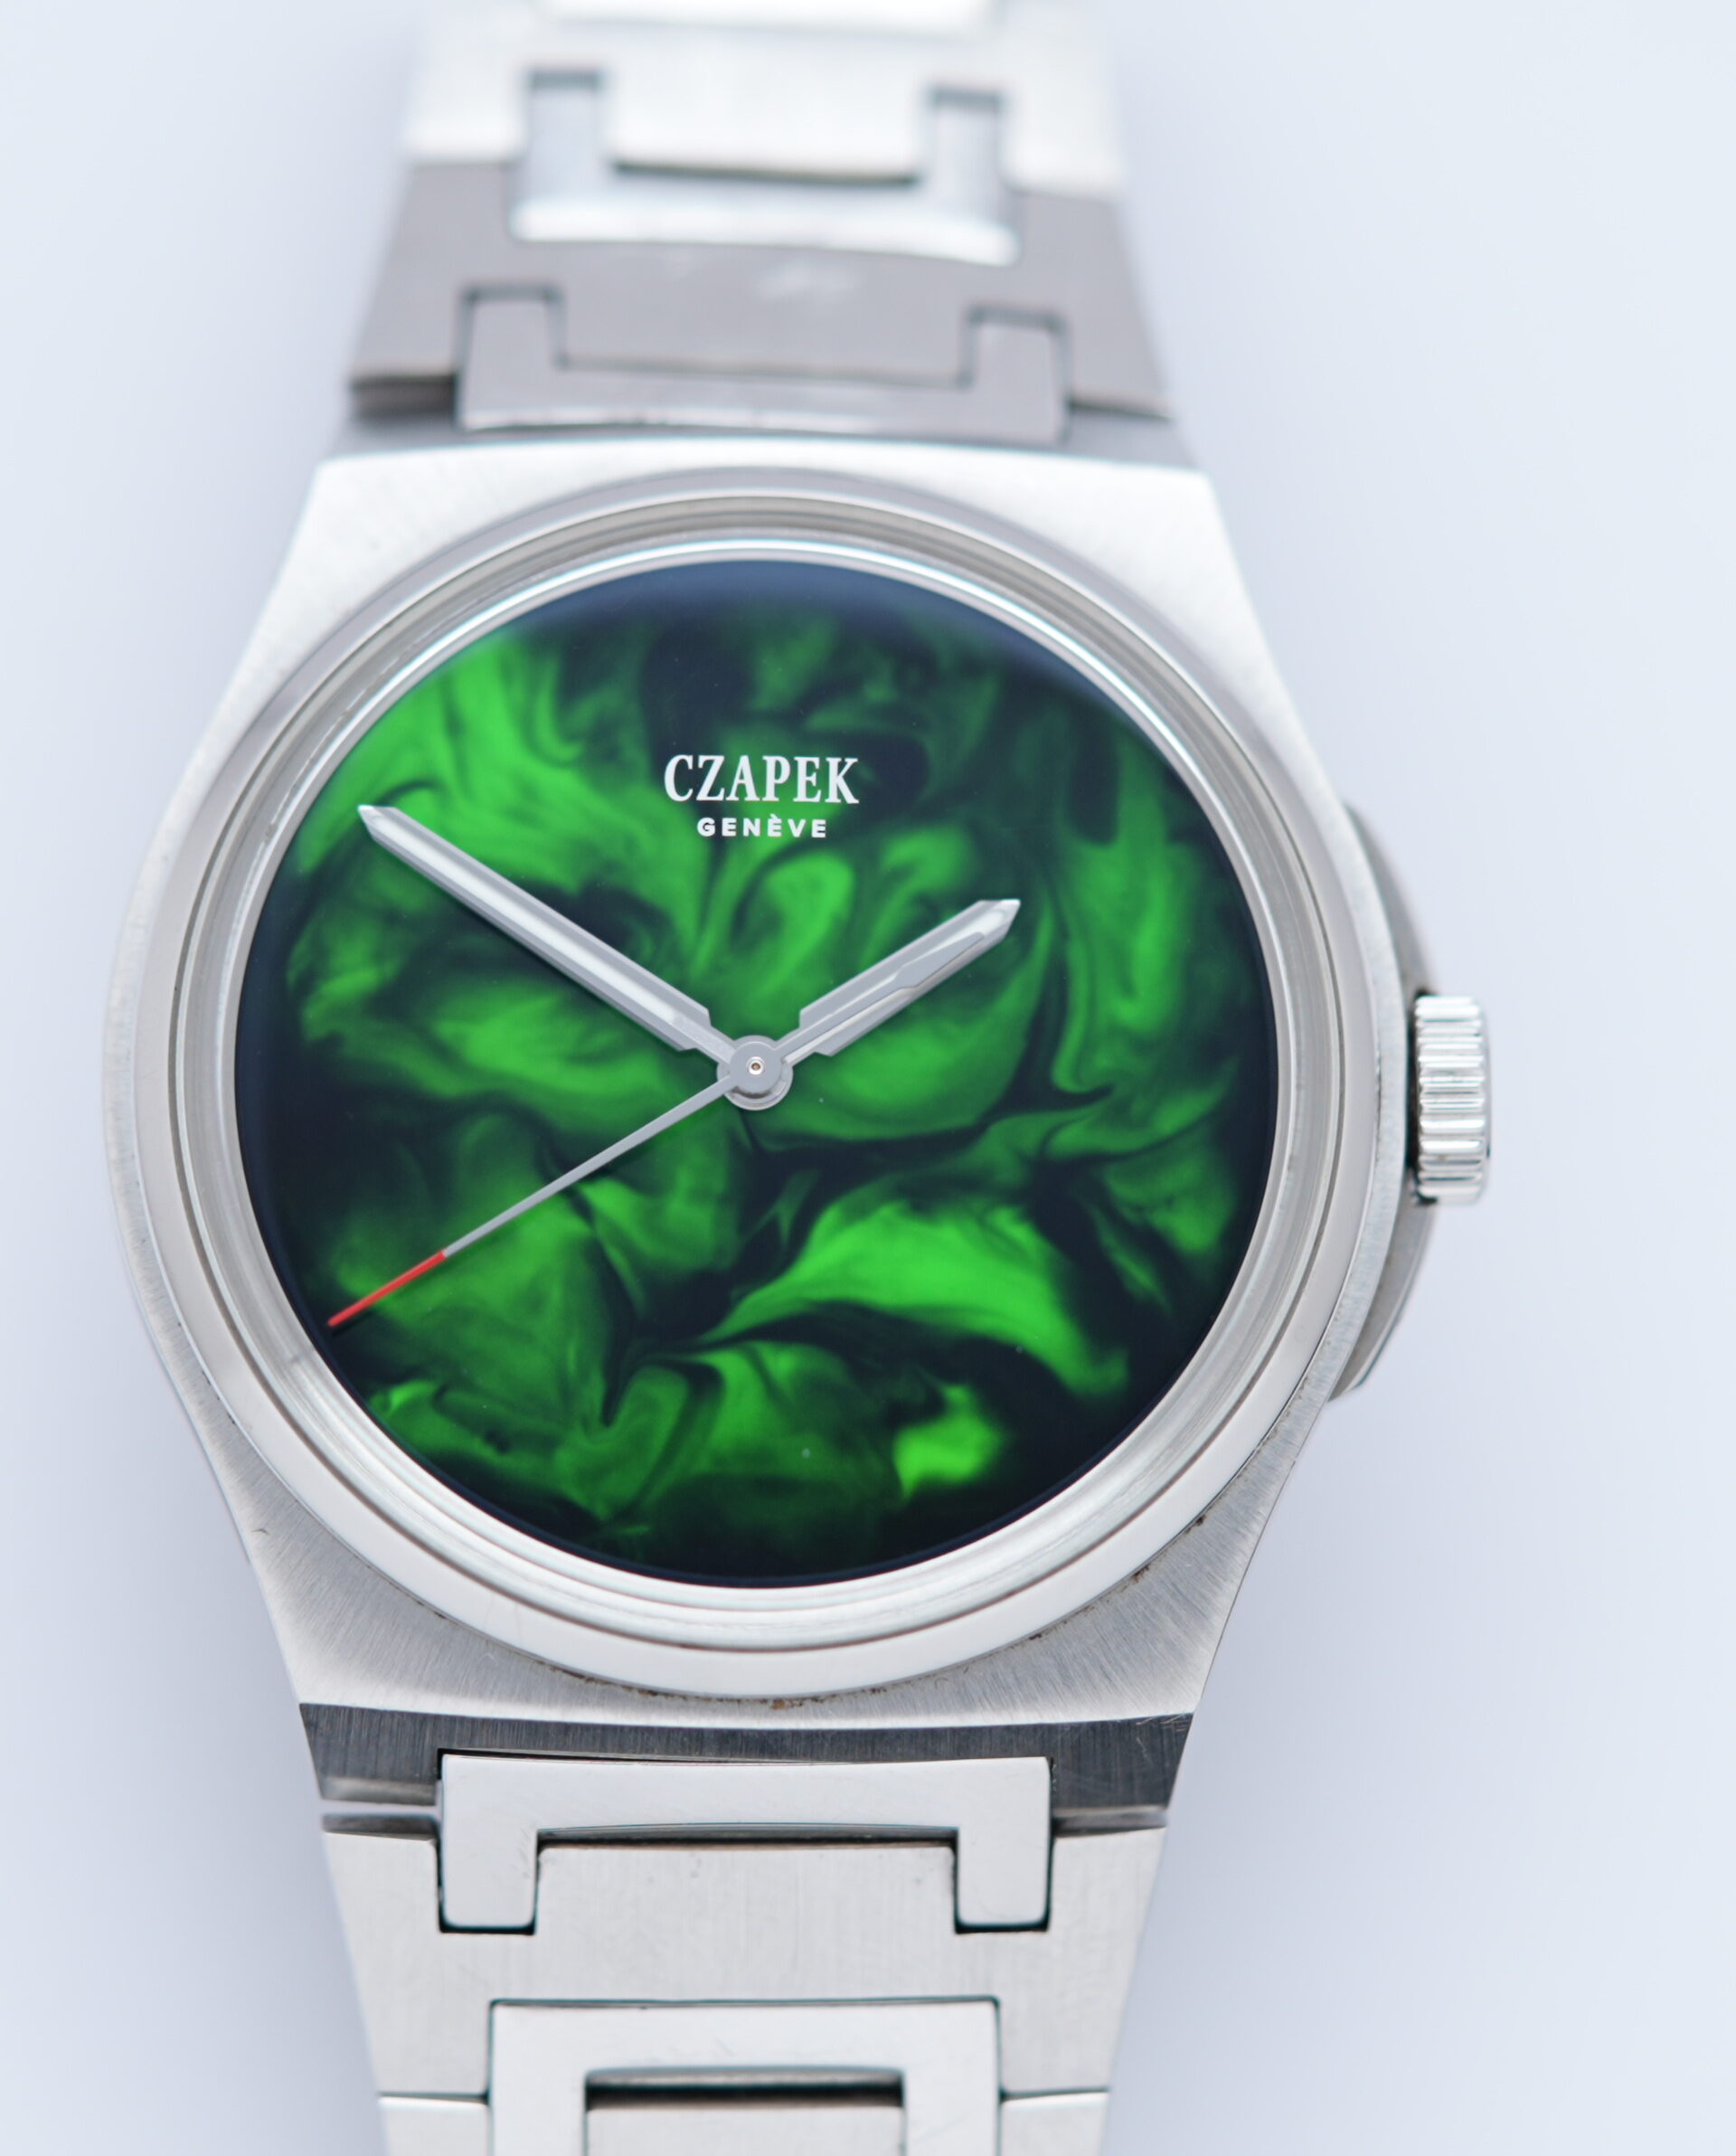 Czapek ANTARCTIQUE SPECIAL EDITION Emerald Iceberg Limited Edition watch featured under white lighting.